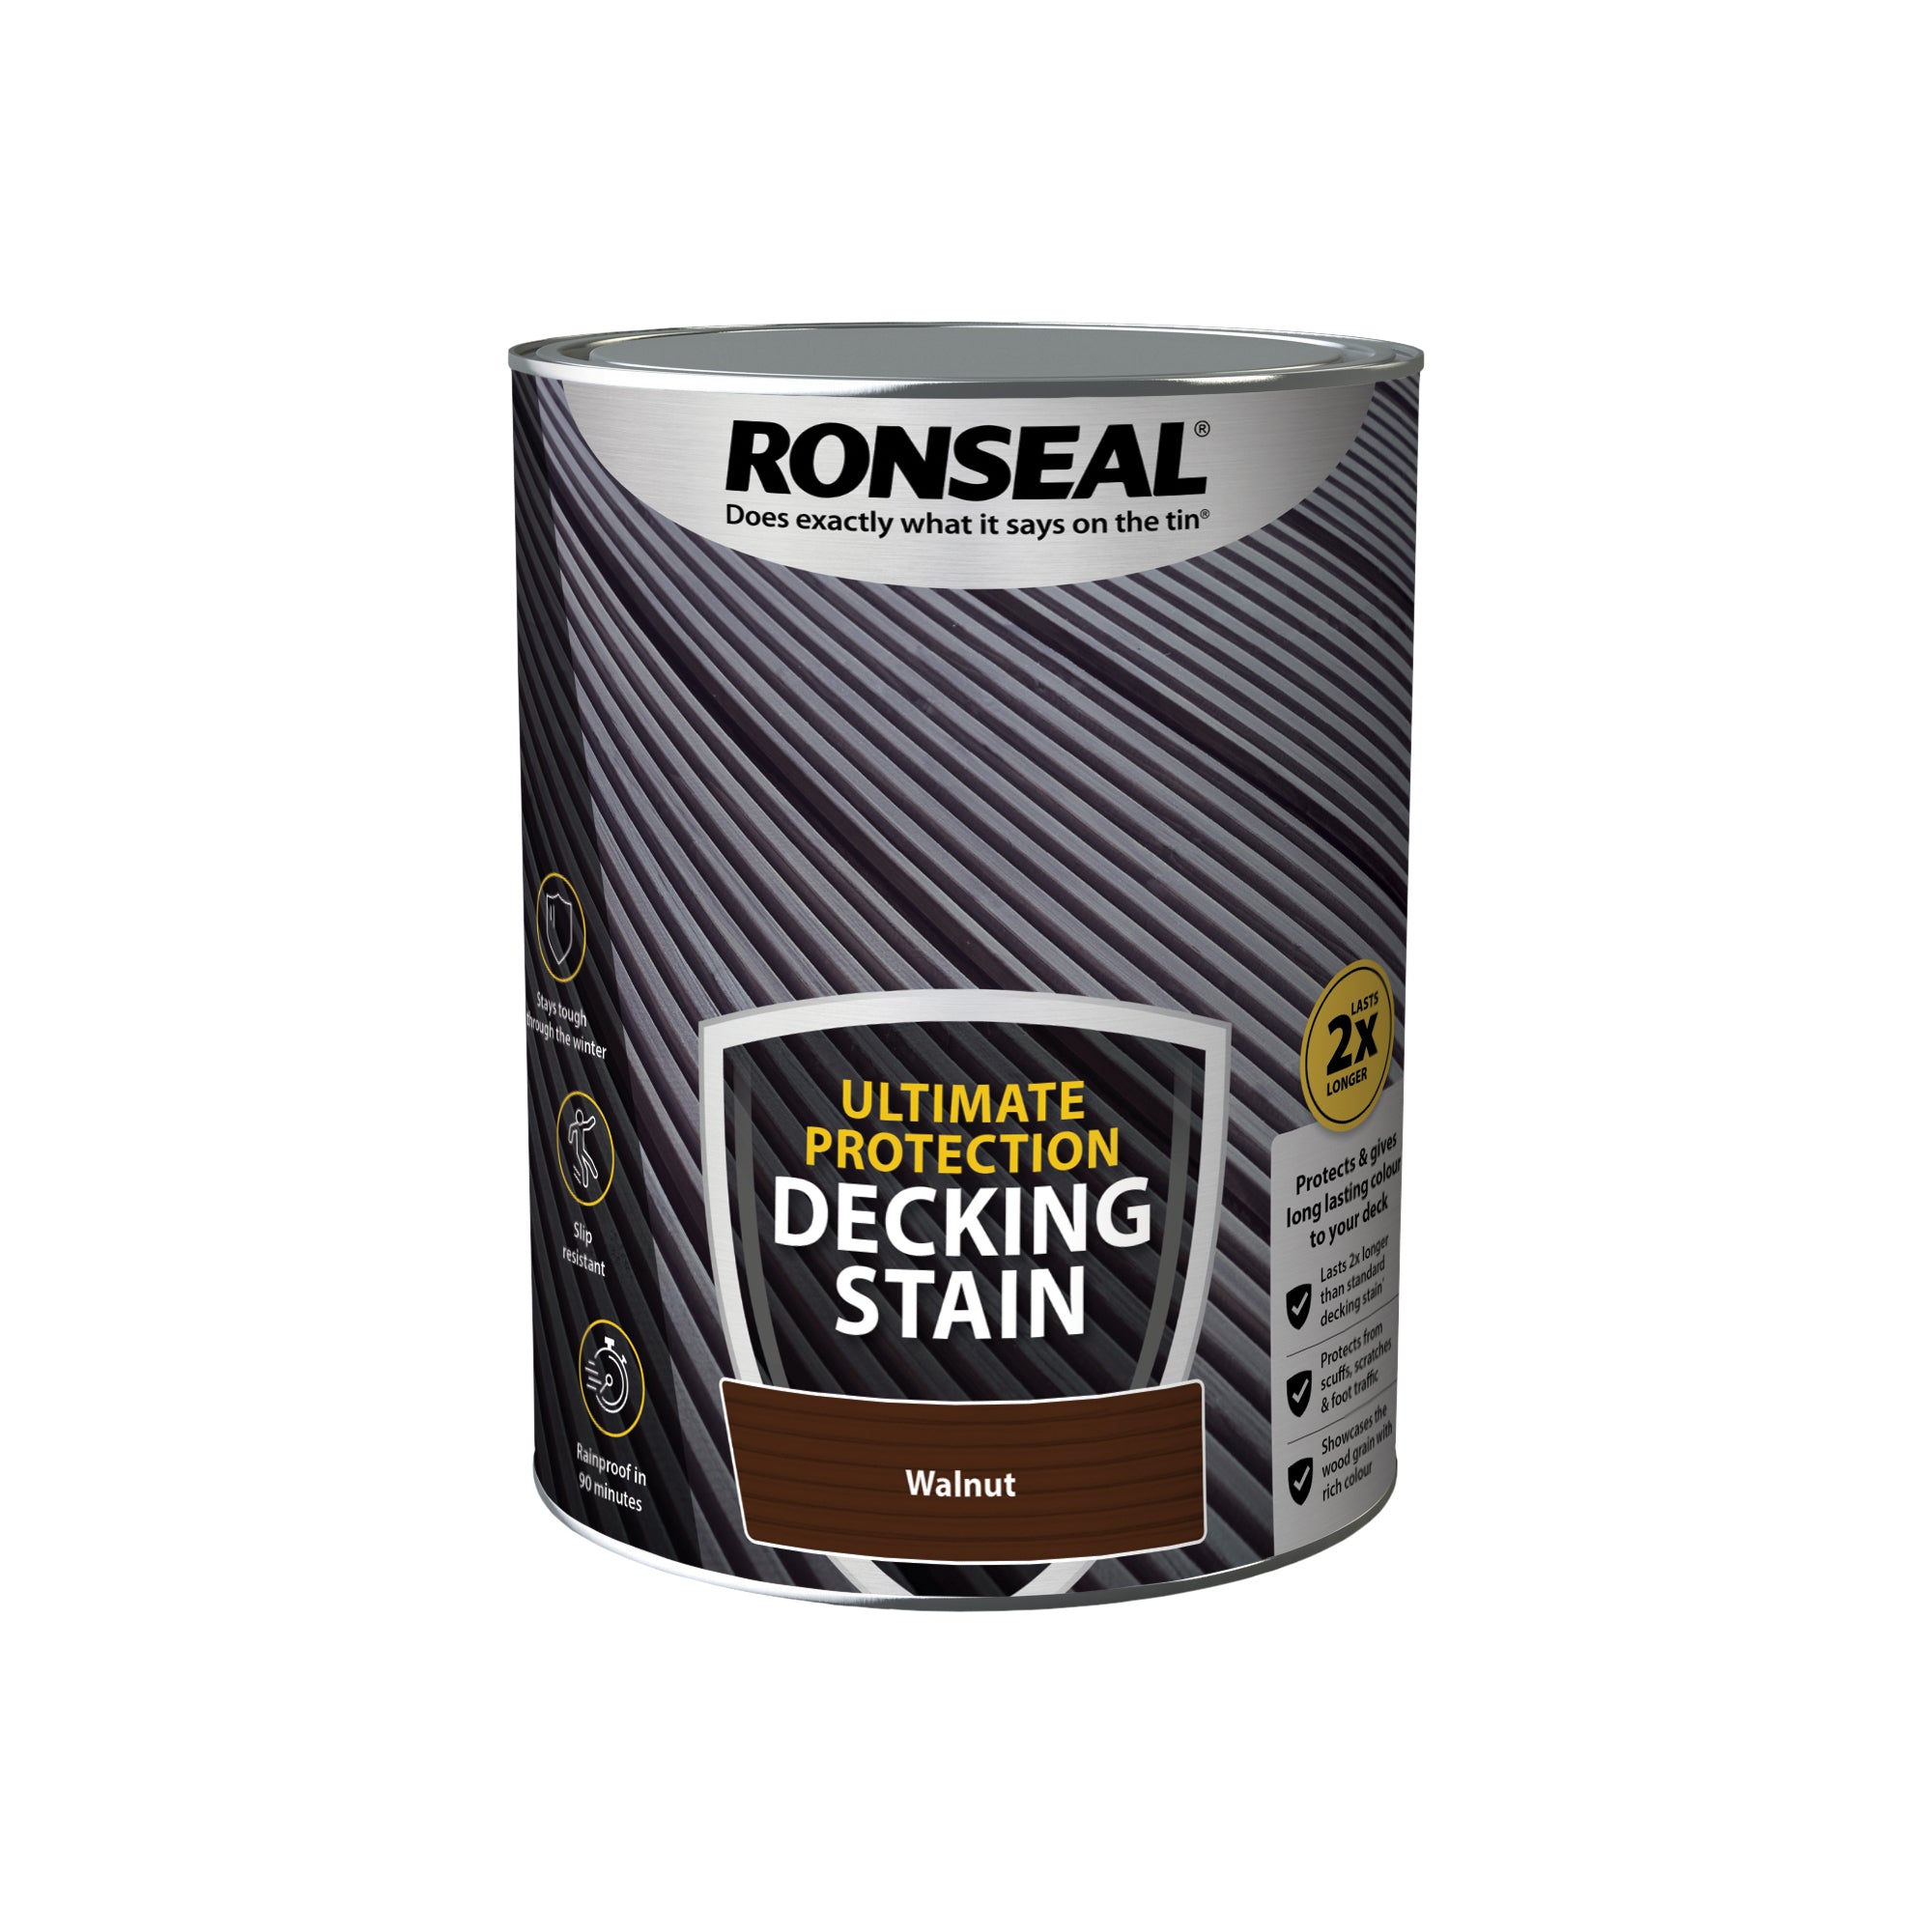 Ronseal-Ultimate-Protection-Decking-Stain-Walnut-5L